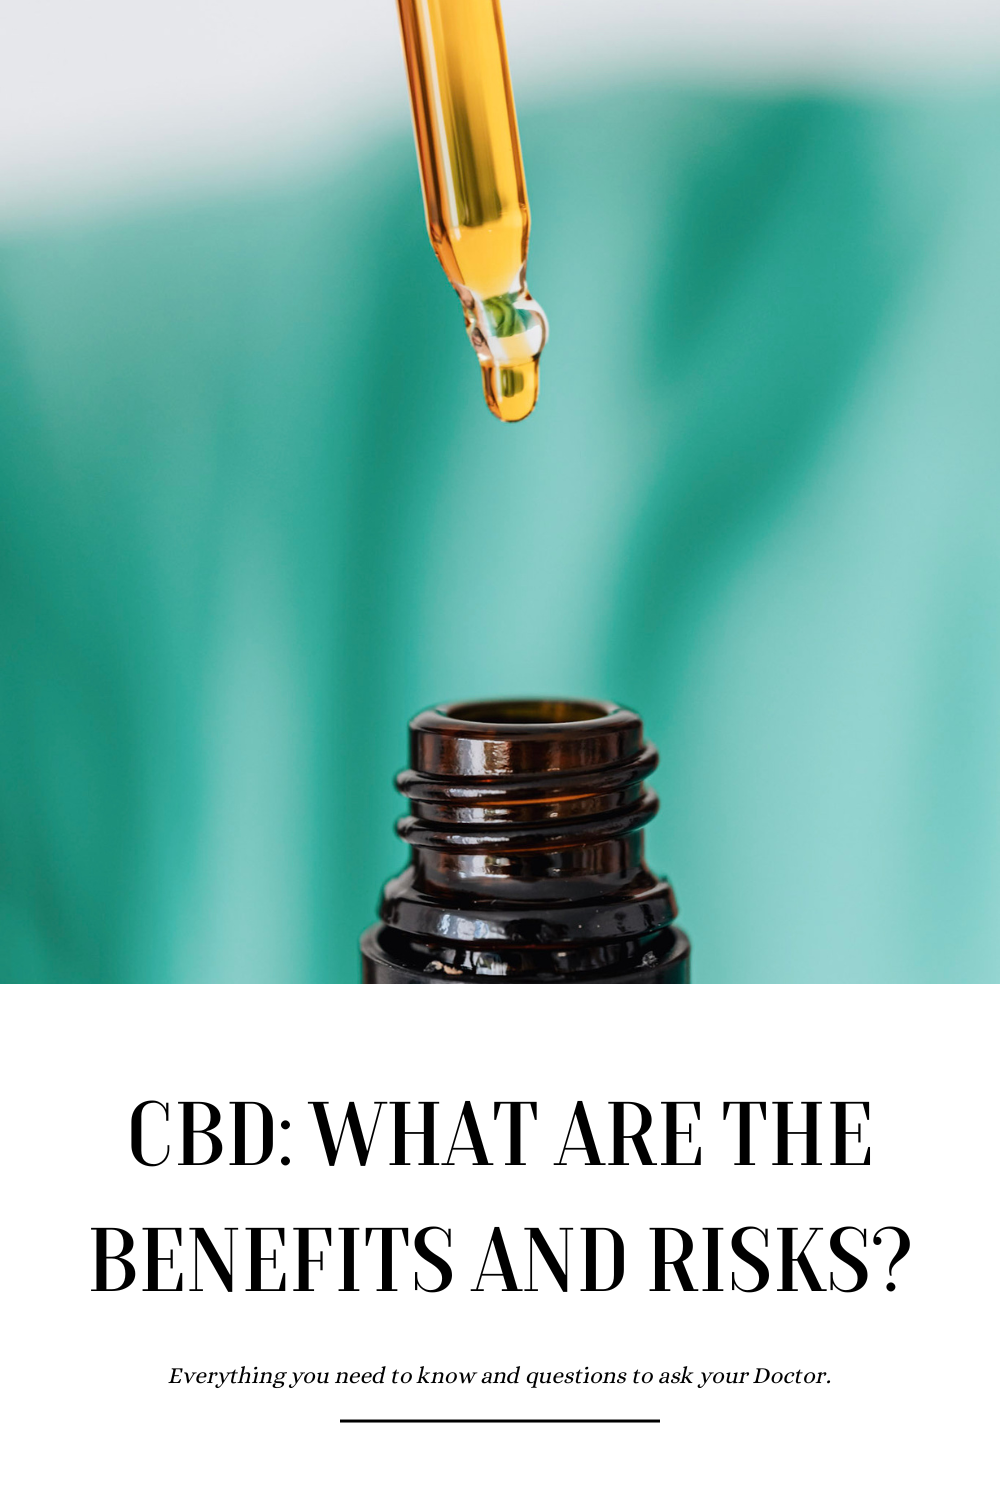 A dropper is above an open bottle, a drop of CBD oil drips down. This article covers the benefits and risks of cannabidiol.